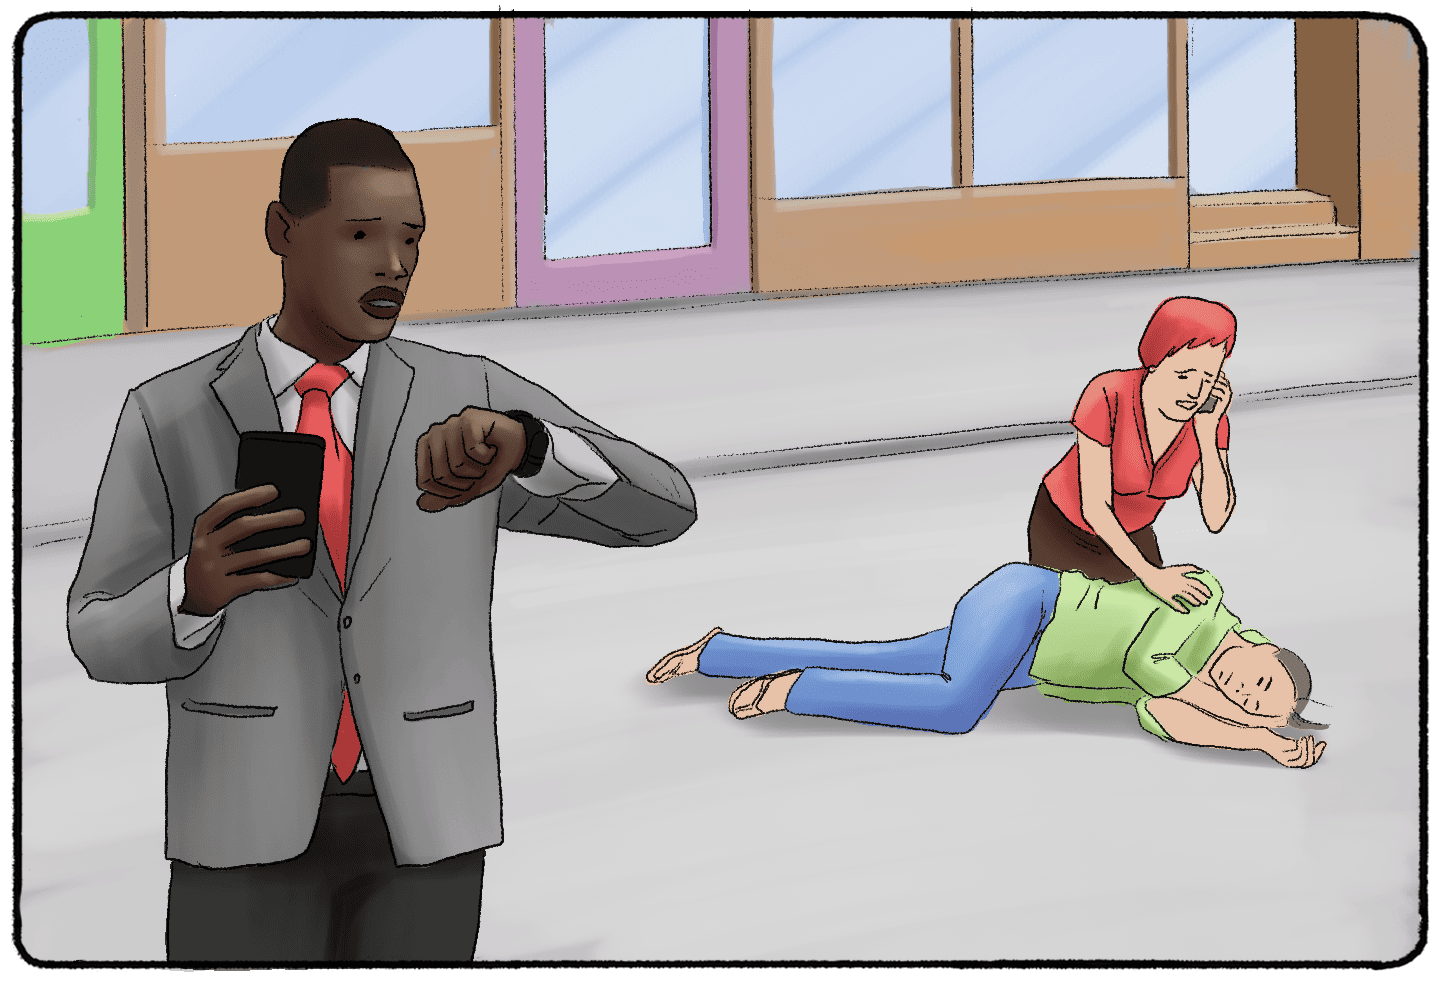 a man looking at his watch while another woman in the background helps a woman who has fallen